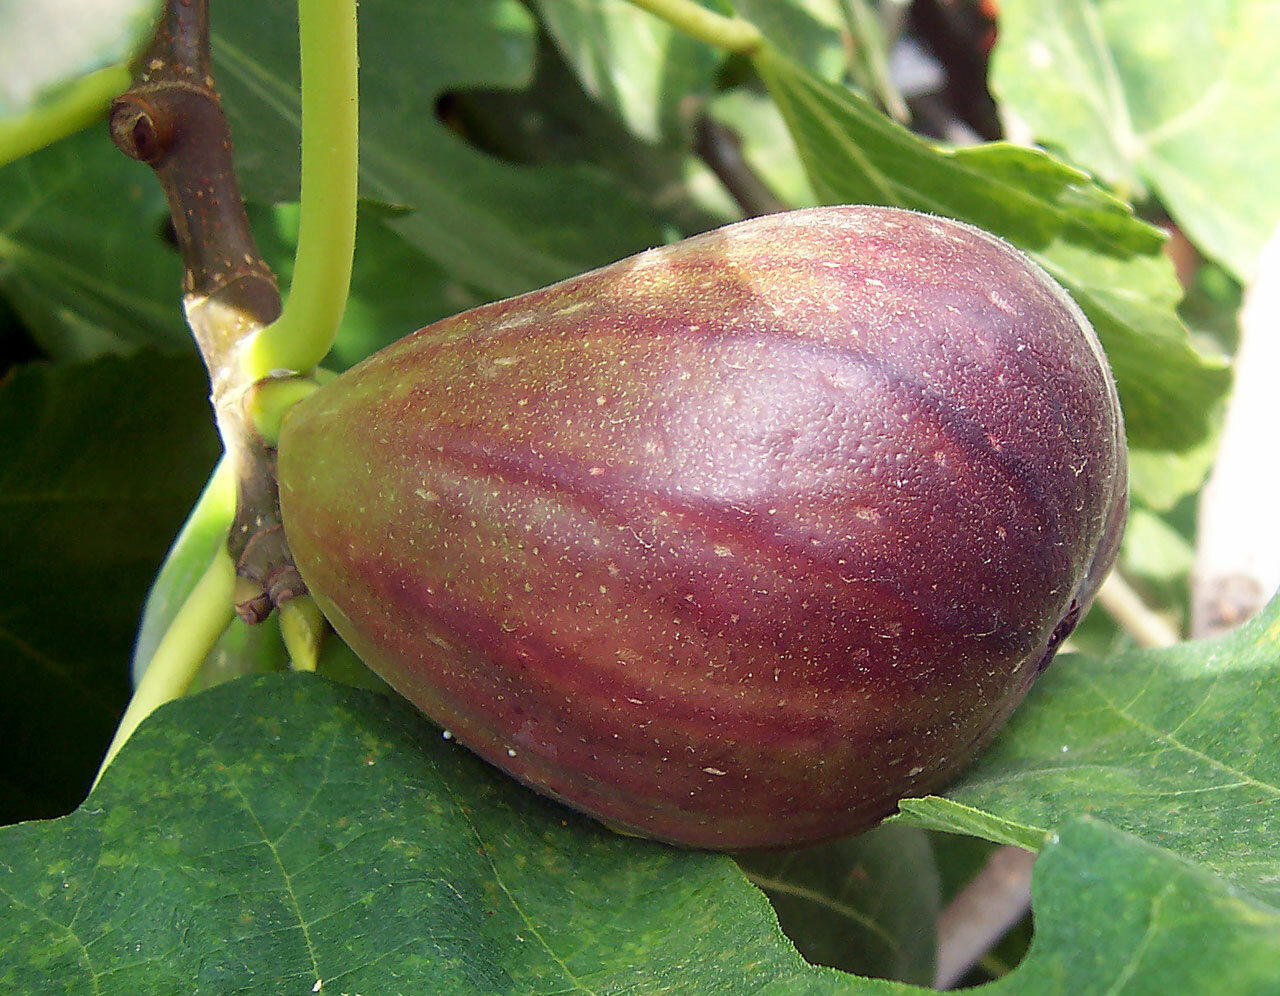 As this fig begins to ripen the color changes from green to a purple-brown then when fully ripe this variety turns totally brown and begins to slightly shrivel, which is normal. COURTESY FIR0002/WIKIMEDIA COMMONS, <a href=